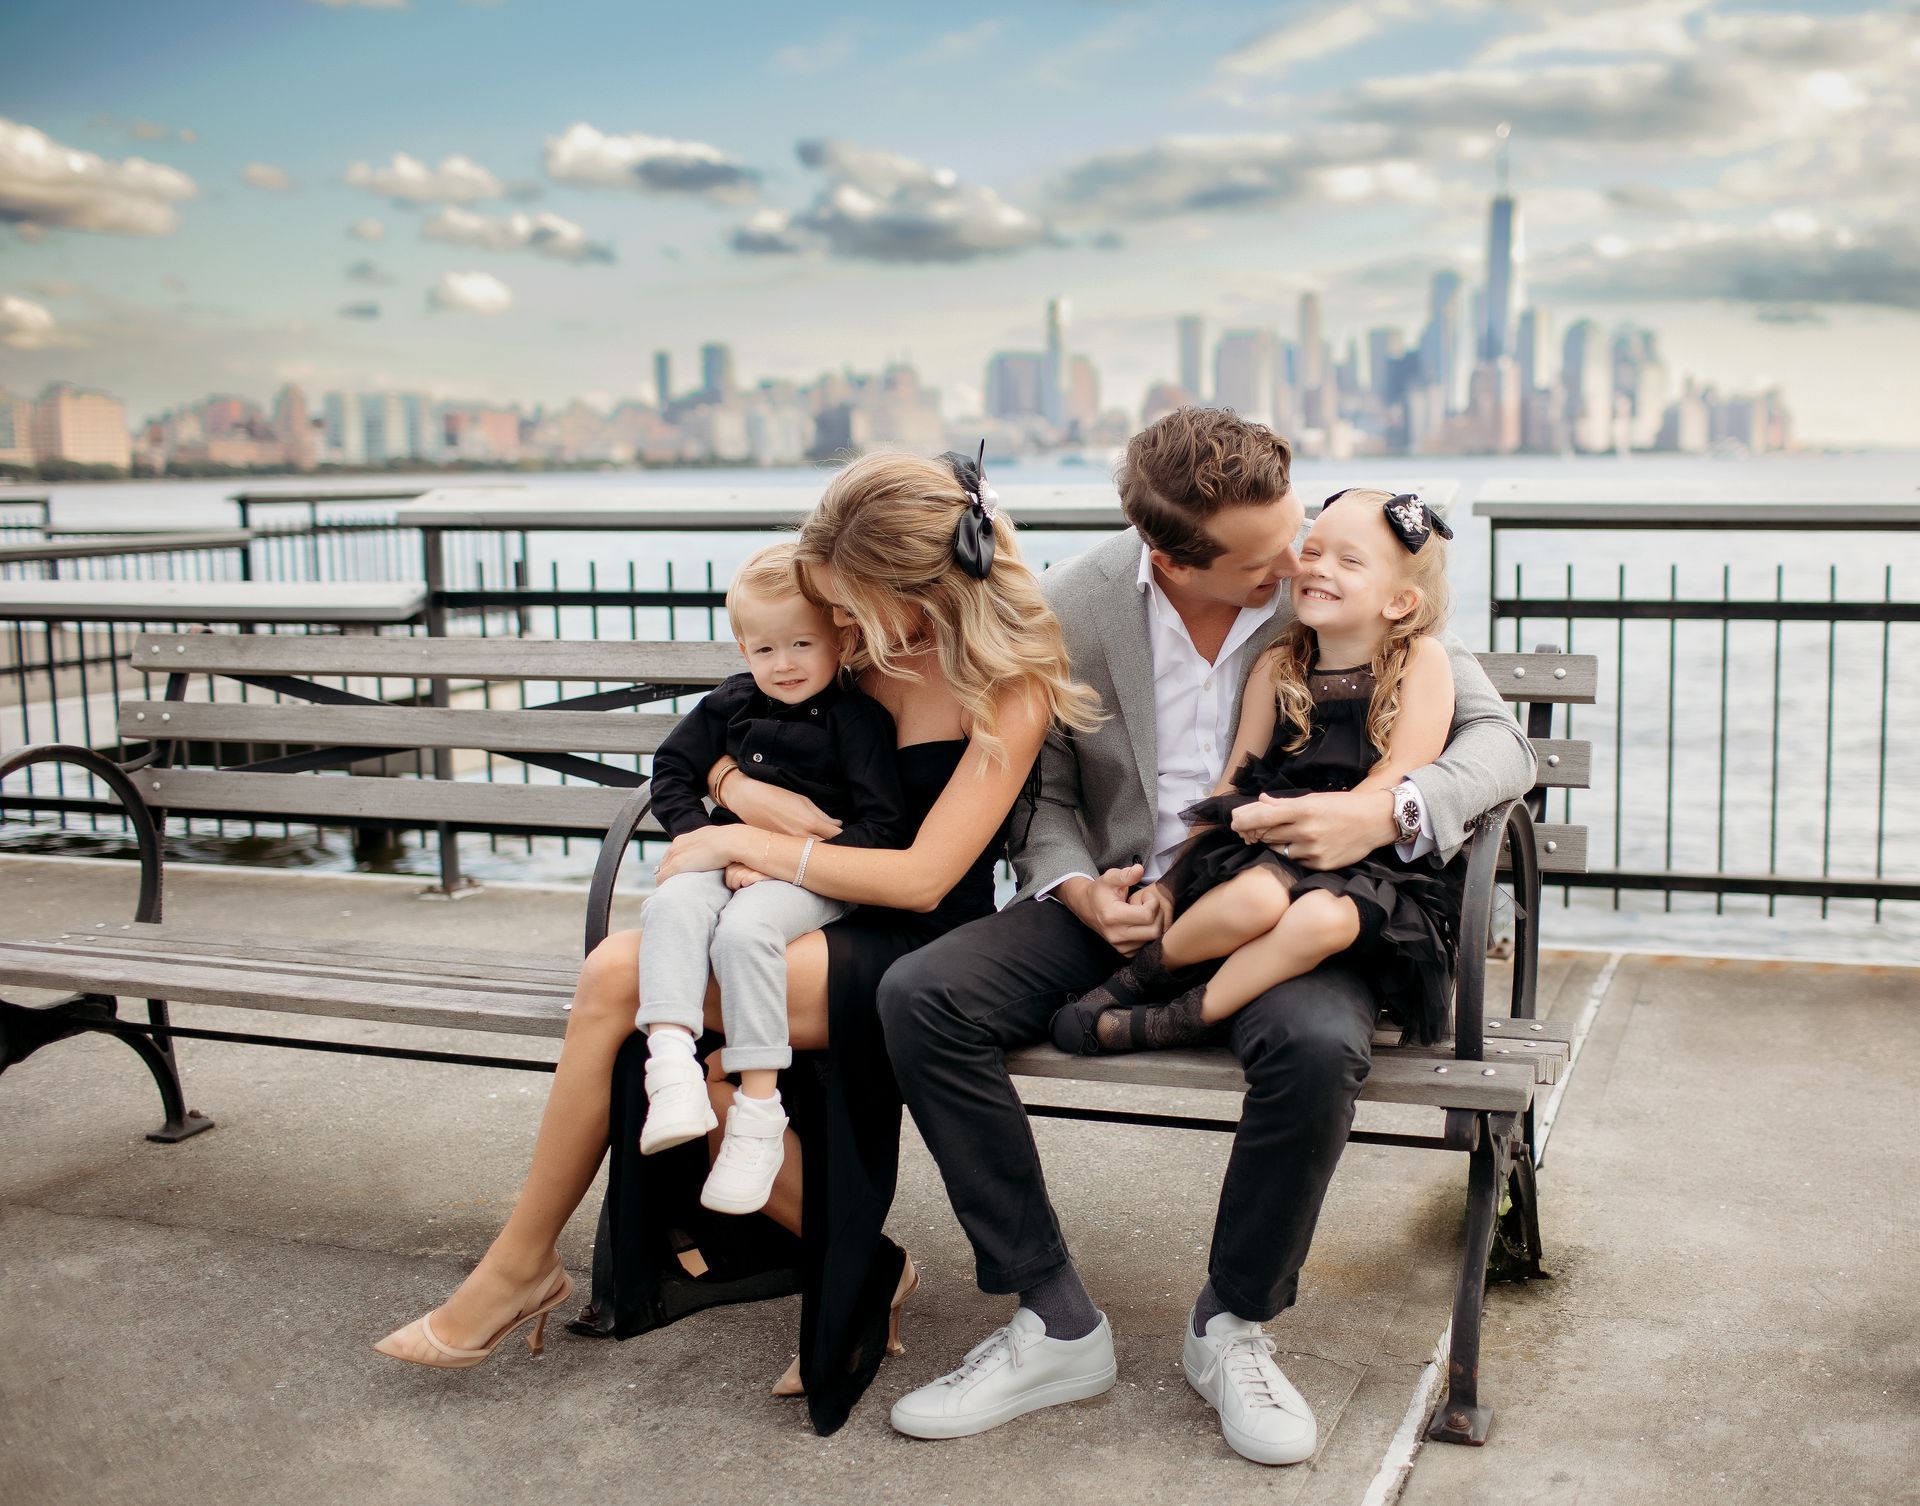 A family is sitting on a bench in front of New York City Skyline.